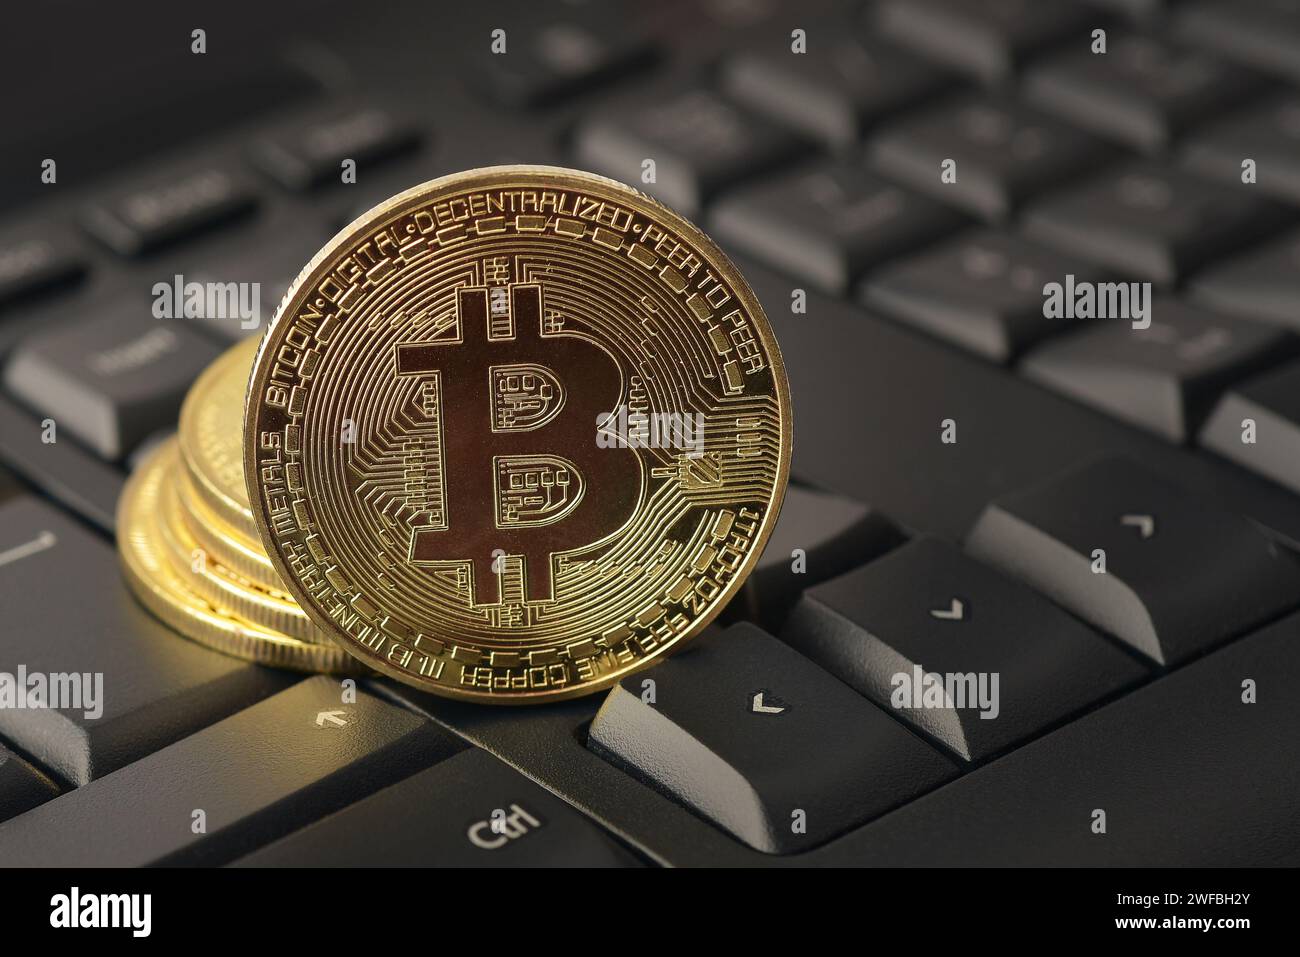 Close up of golden bitcoin on keyboard. Virtual money, mining, blockchain technology concepts. Cryptocurrency. Stock Photo